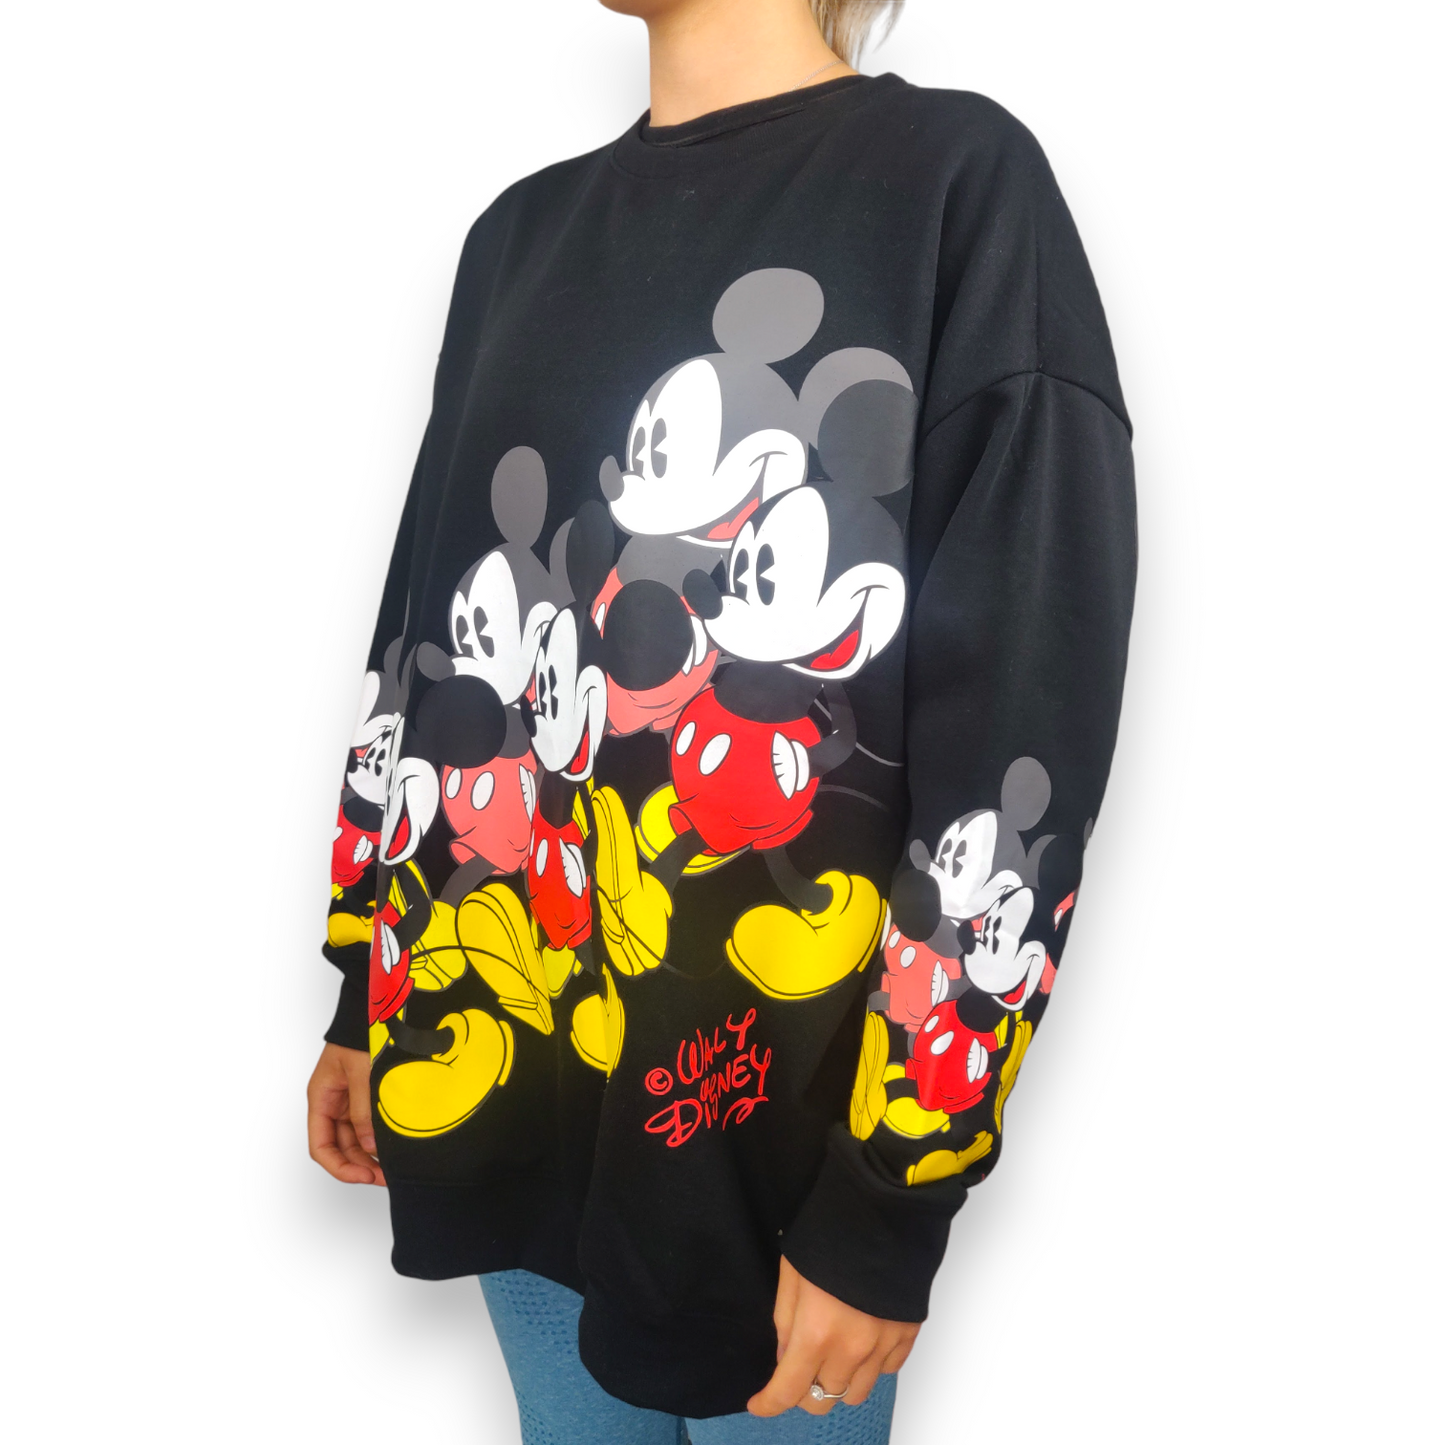 Disney Vintage Classic Mickey Mouse Black Pullover Sweatshirt Women Size Small